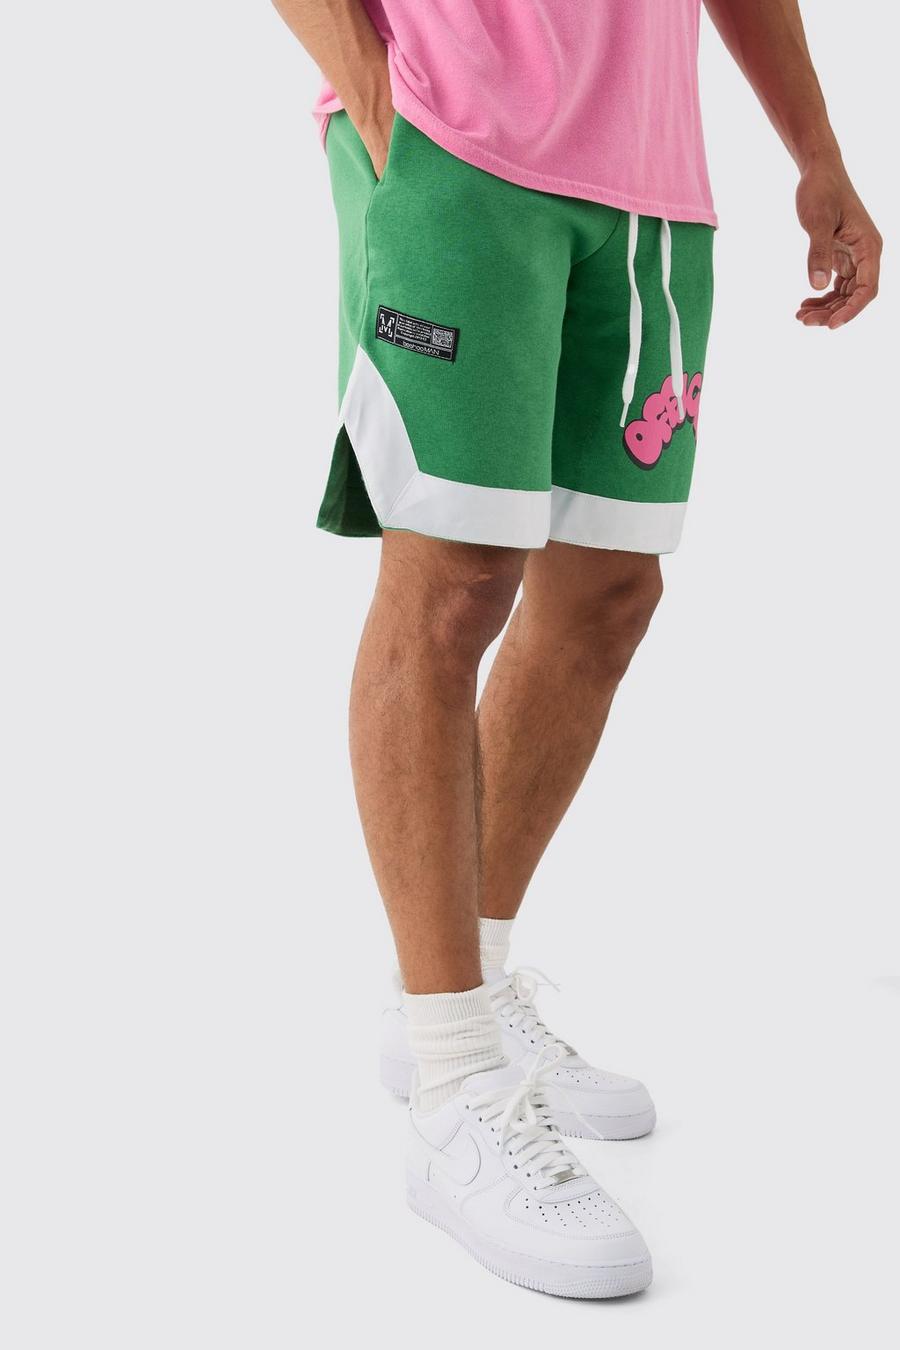 Forest Official Basketball Shorts